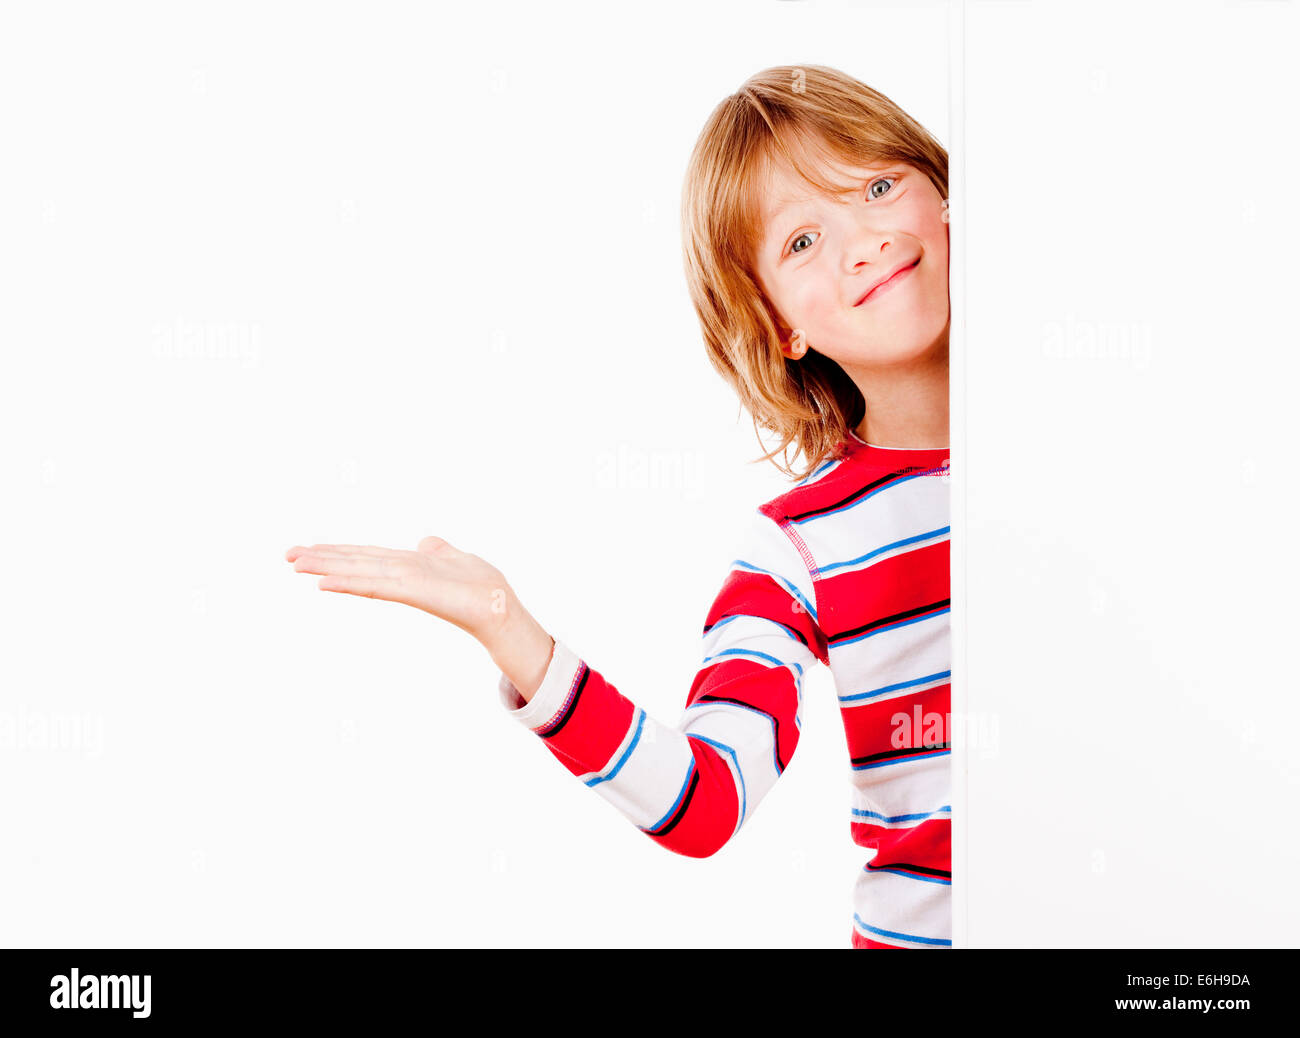 Boy Peeking Out From Behind A White Board With His Arm Outstretched Stock Photo